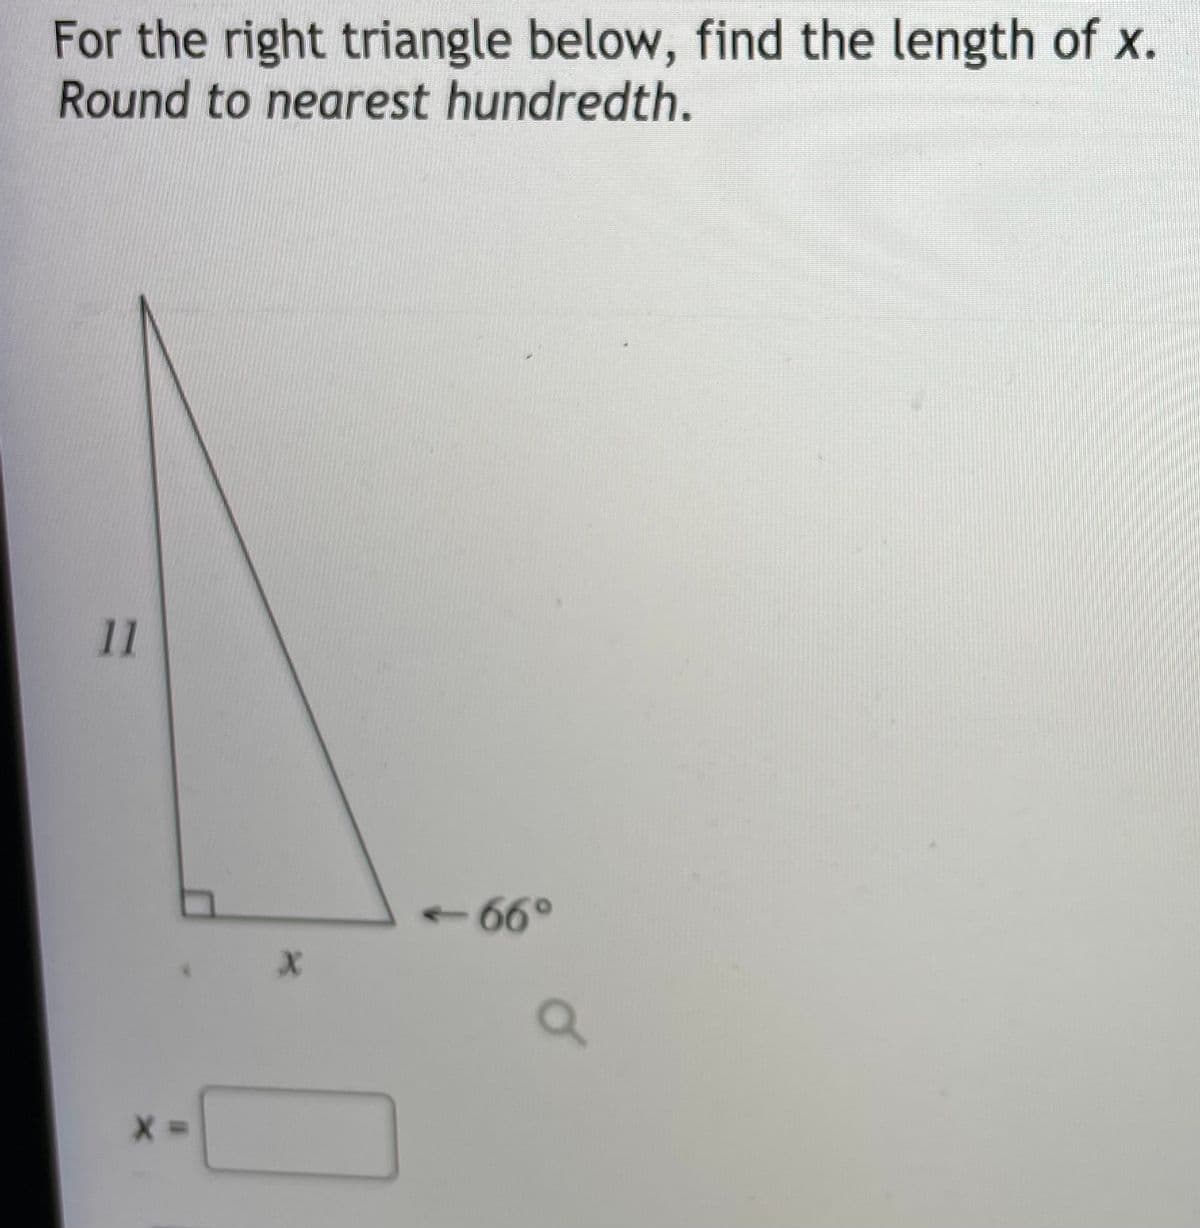 For the right triangle below, find the length of x.
Round to nearest hundredth.
11
+66°
